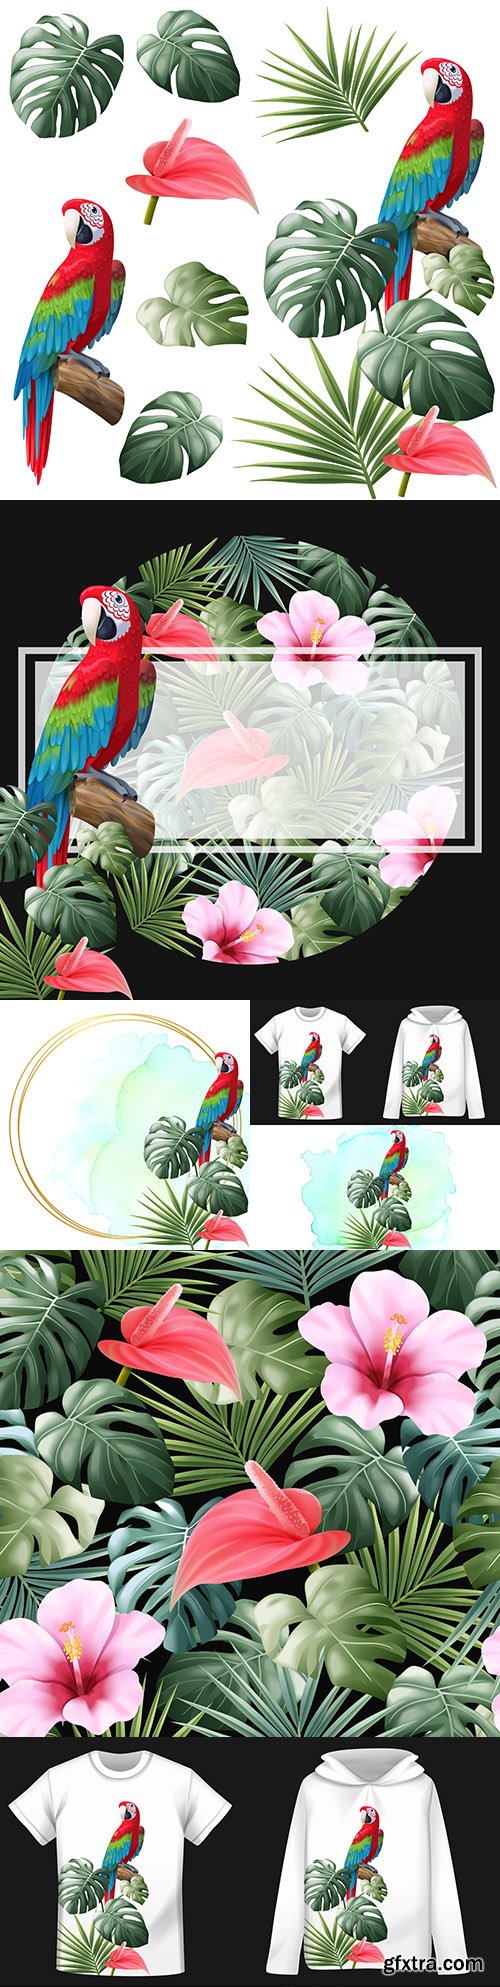 Parrot, leaf monsters and palm trees with colors realistic illustrations